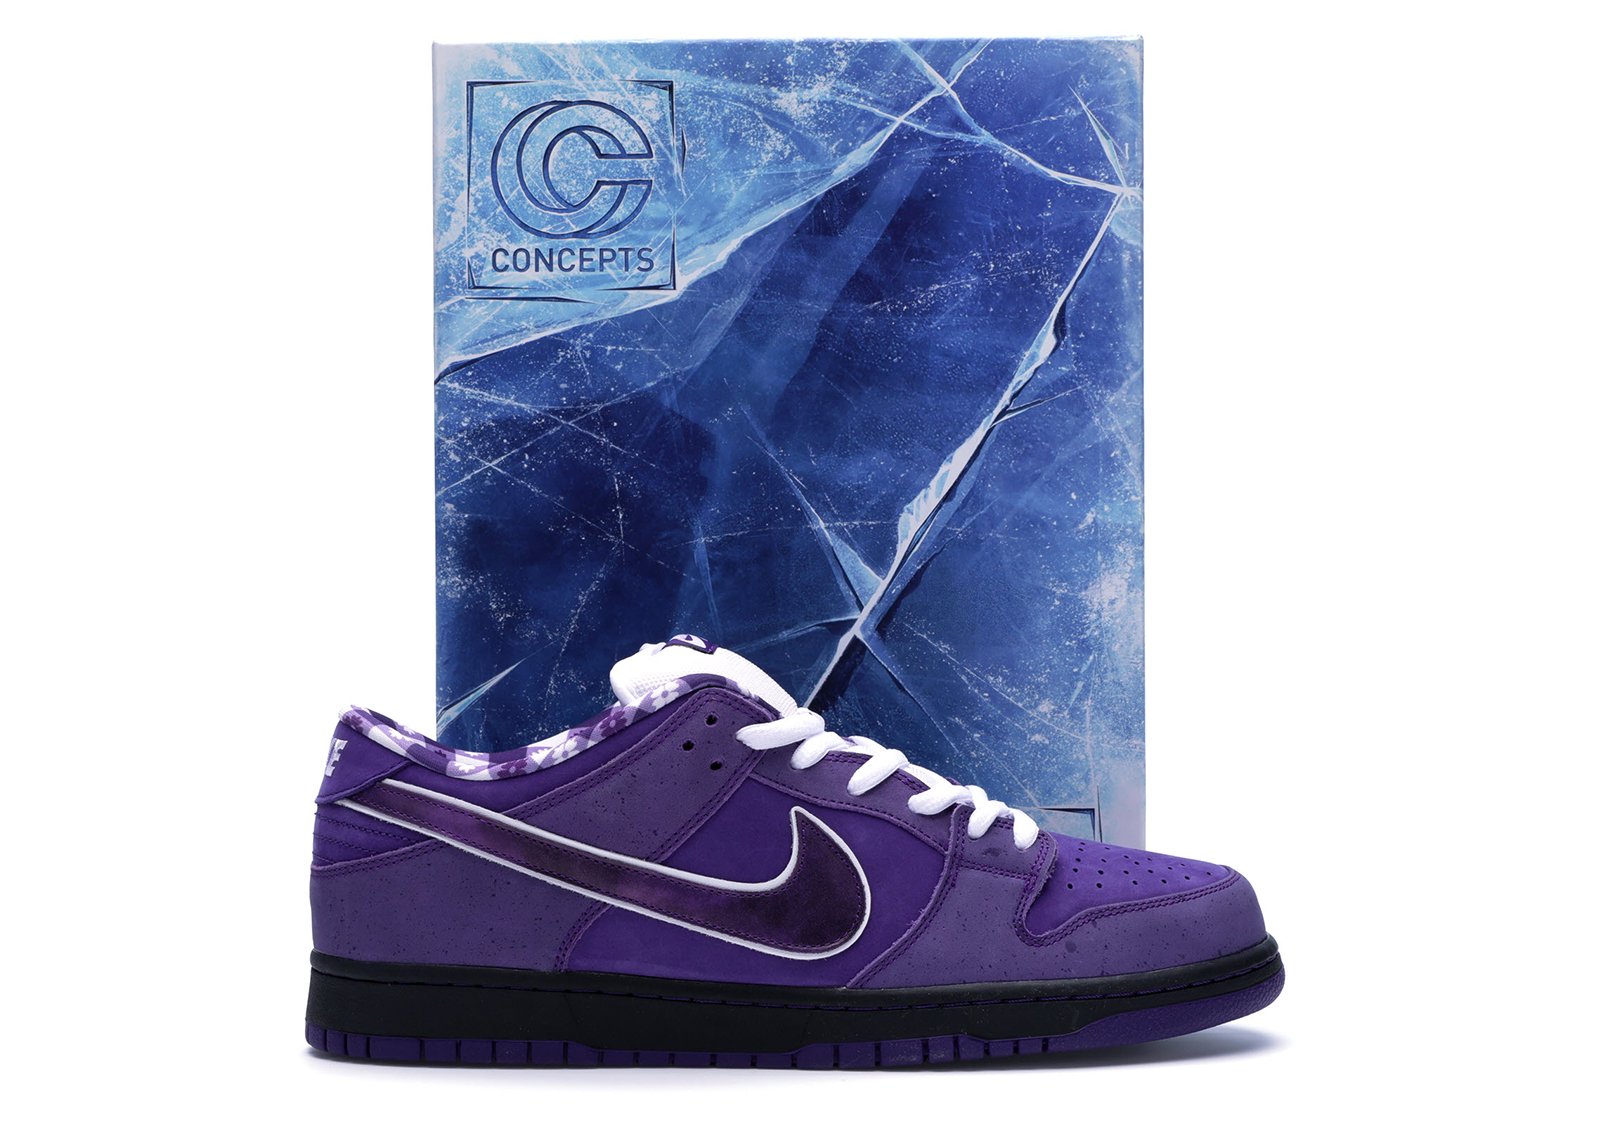 Nike SB Dunk Low Concepts Purple Lobster (Special Box) sneakers